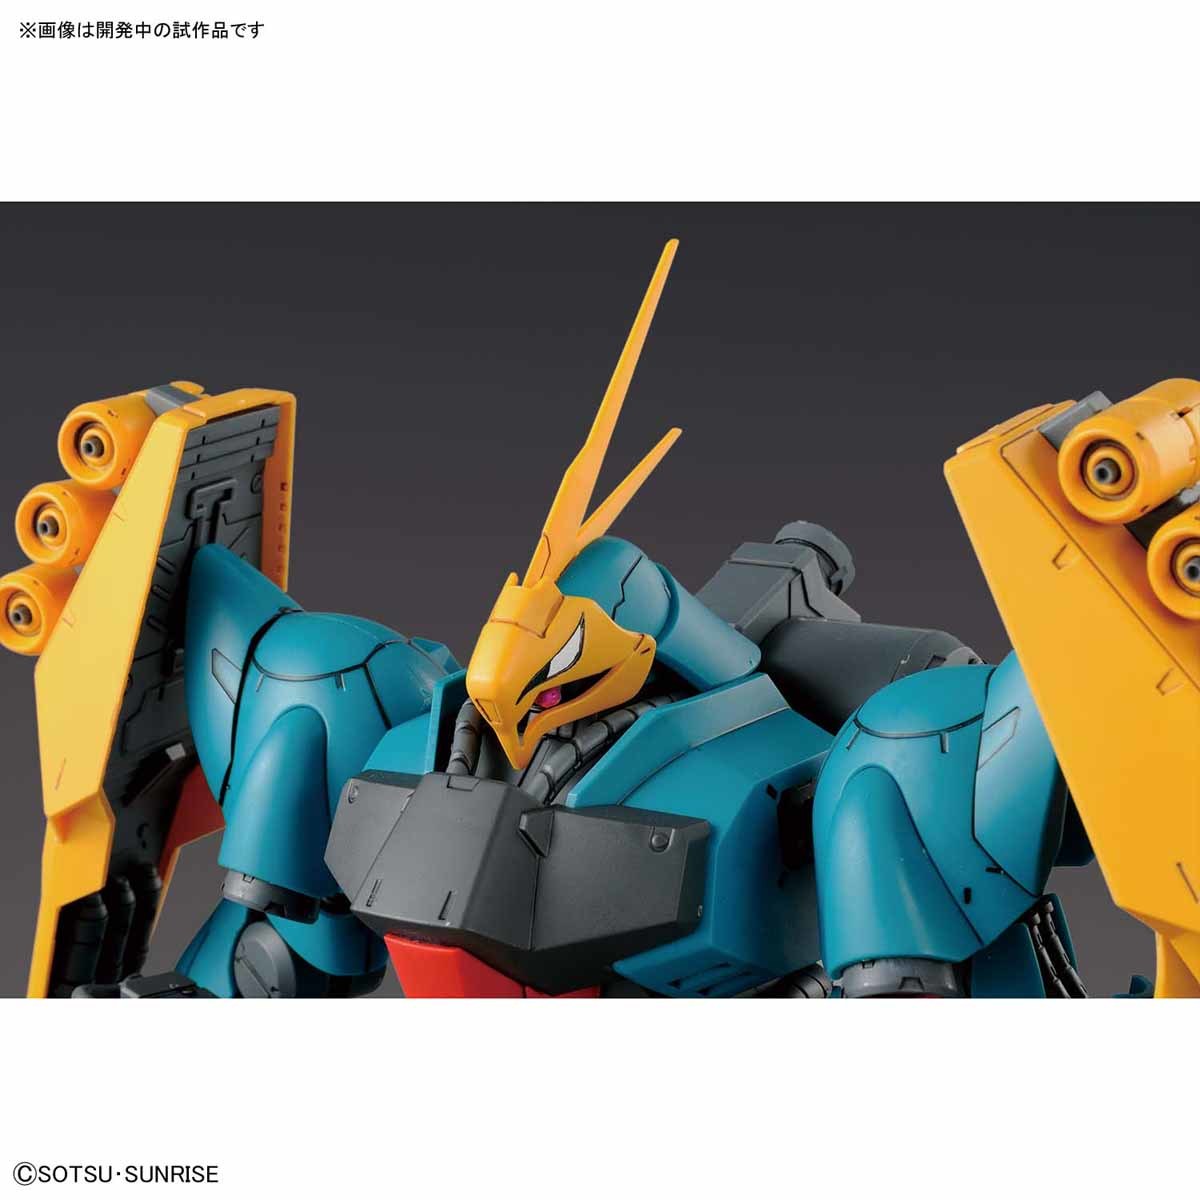 RE/100 MSN-03 Jagd Doga - Release Info, Box art and Official Images - Gundam Kits Collection News and Reviews